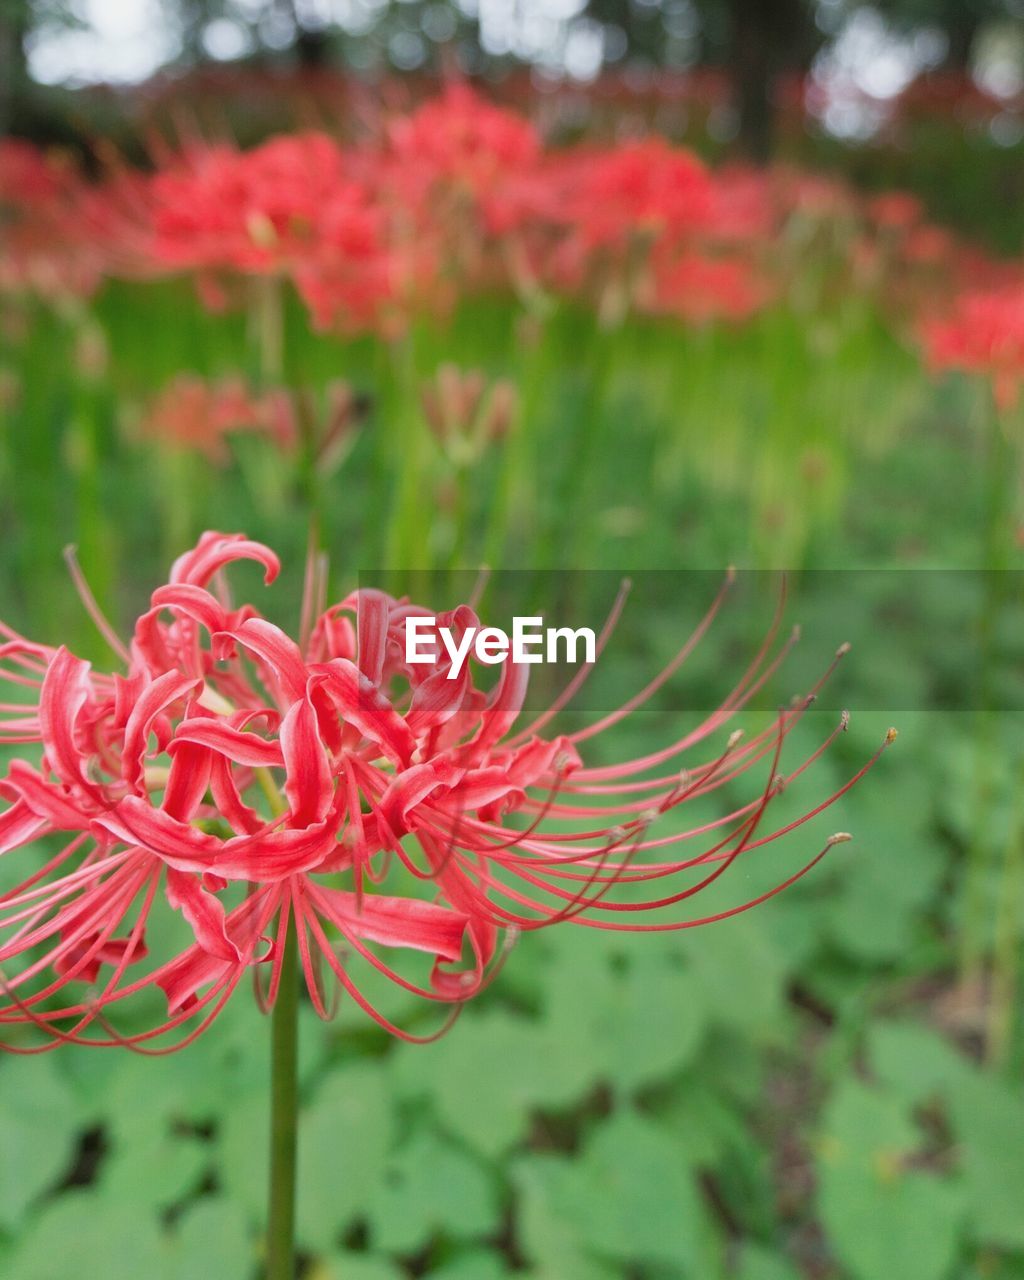 CLOSE-UP OF RED FLOWER BLOOMING